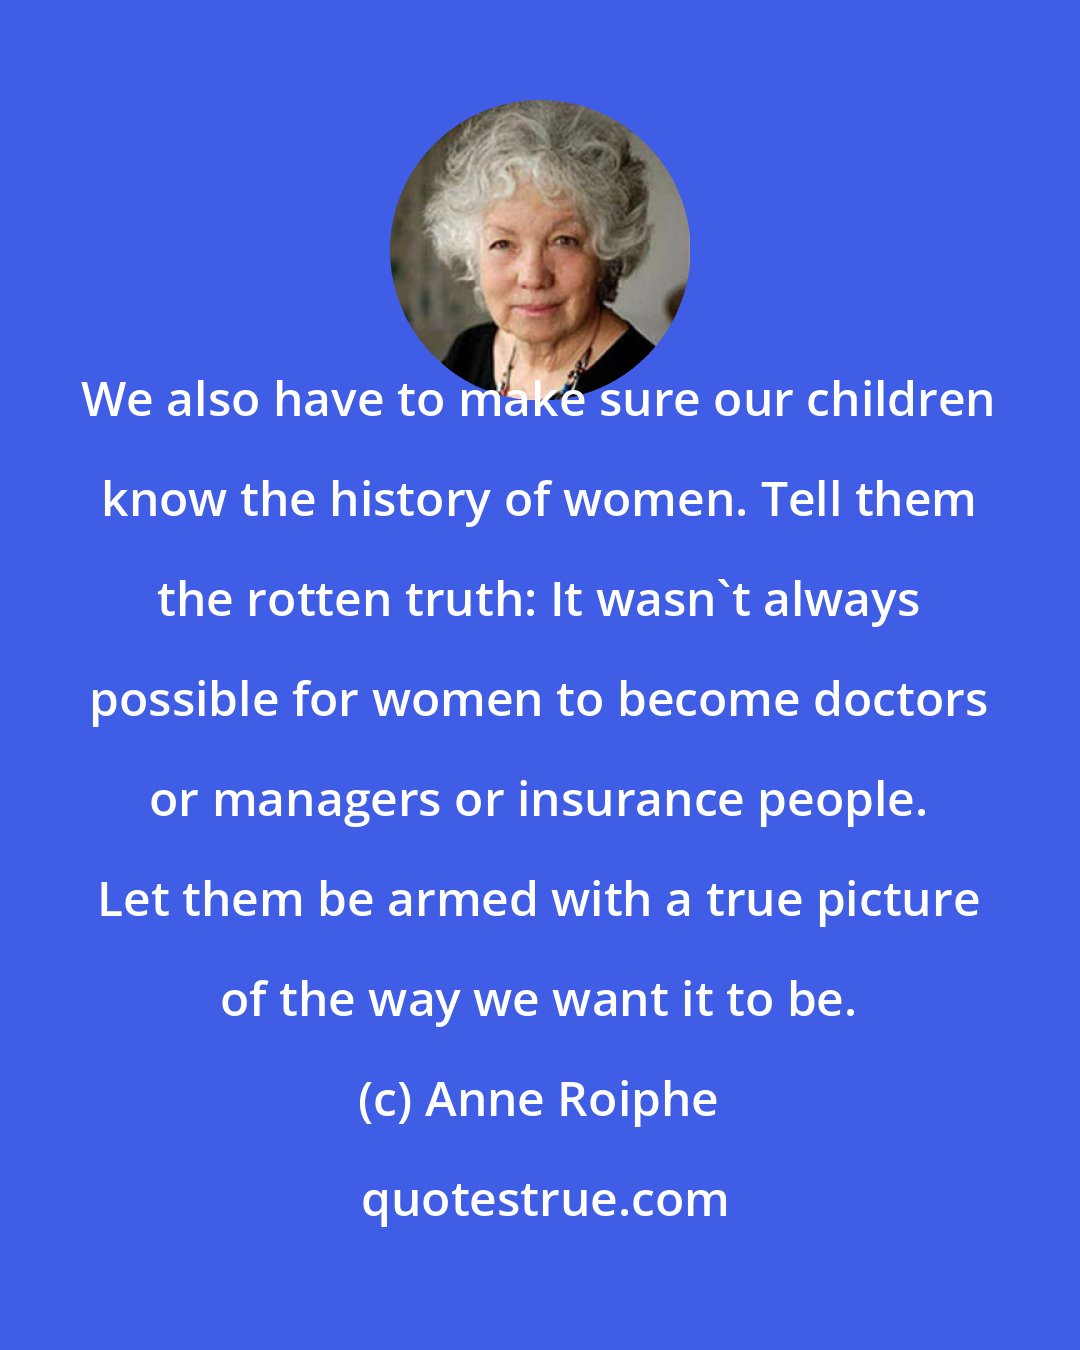 Anne Roiphe: We also have to make sure our children know the history of women. Tell them the rotten truth: It wasn't always possible for women to become doctors or managers or insurance people. Let them be armed with a true picture of the way we want it to be.